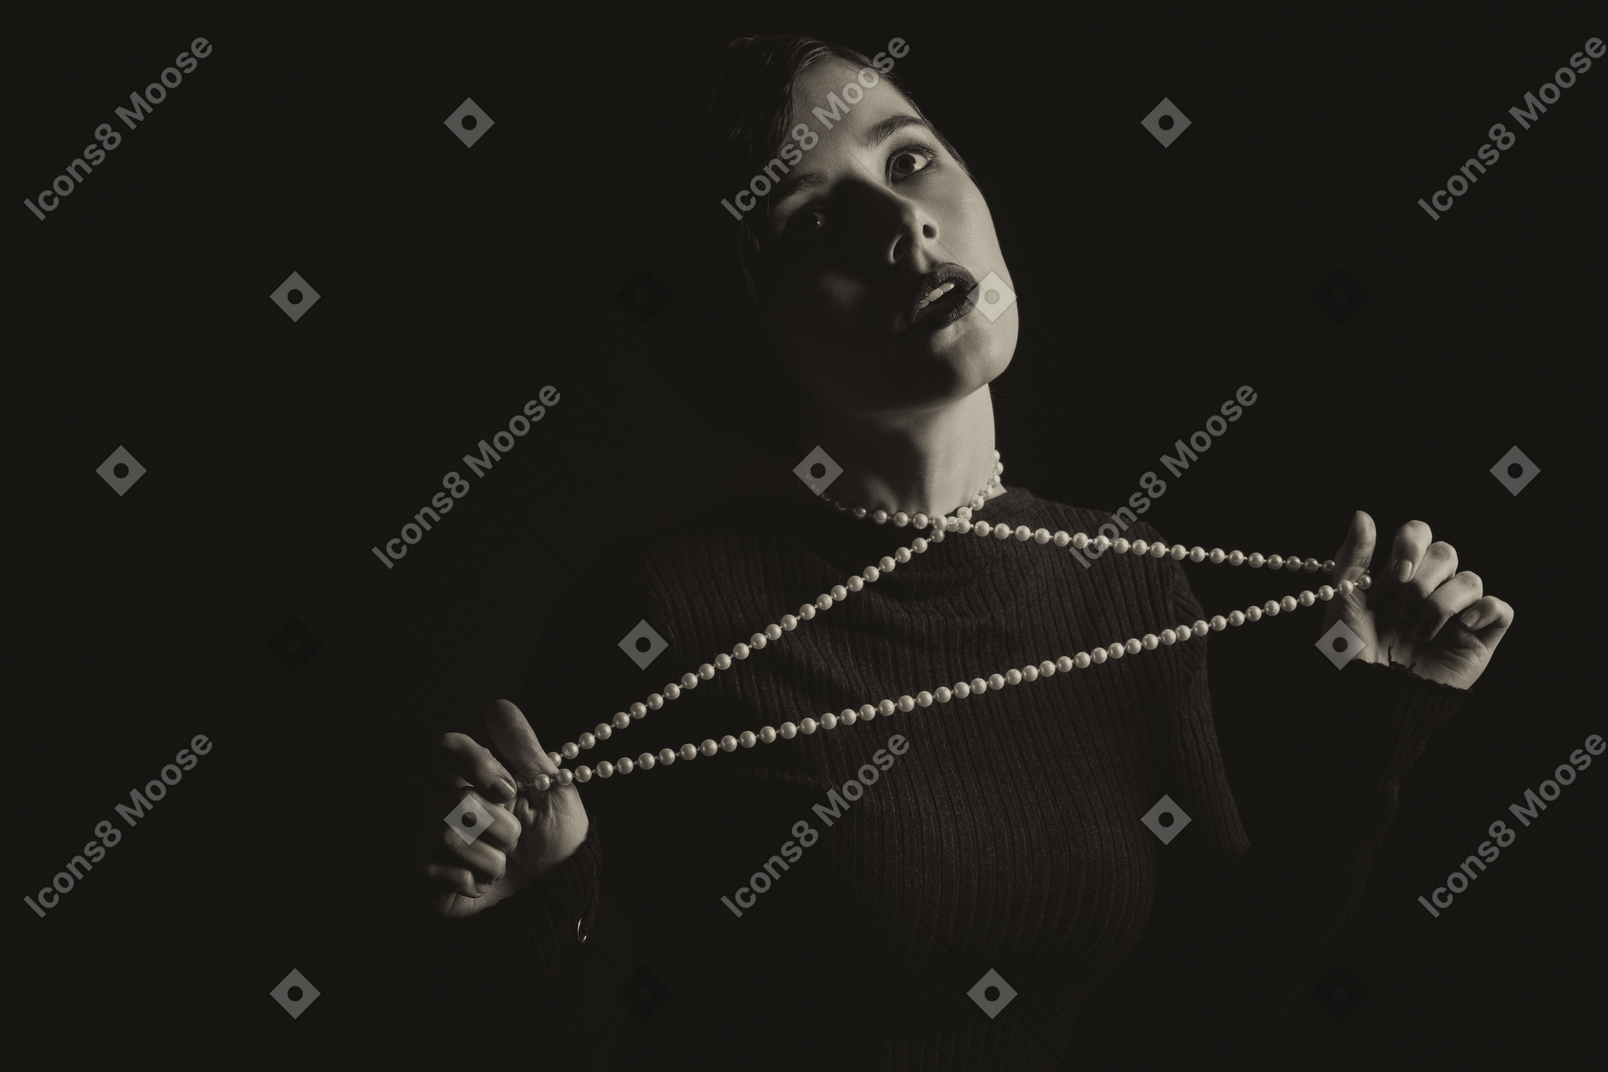 Woman tightening a string of beads on her neck